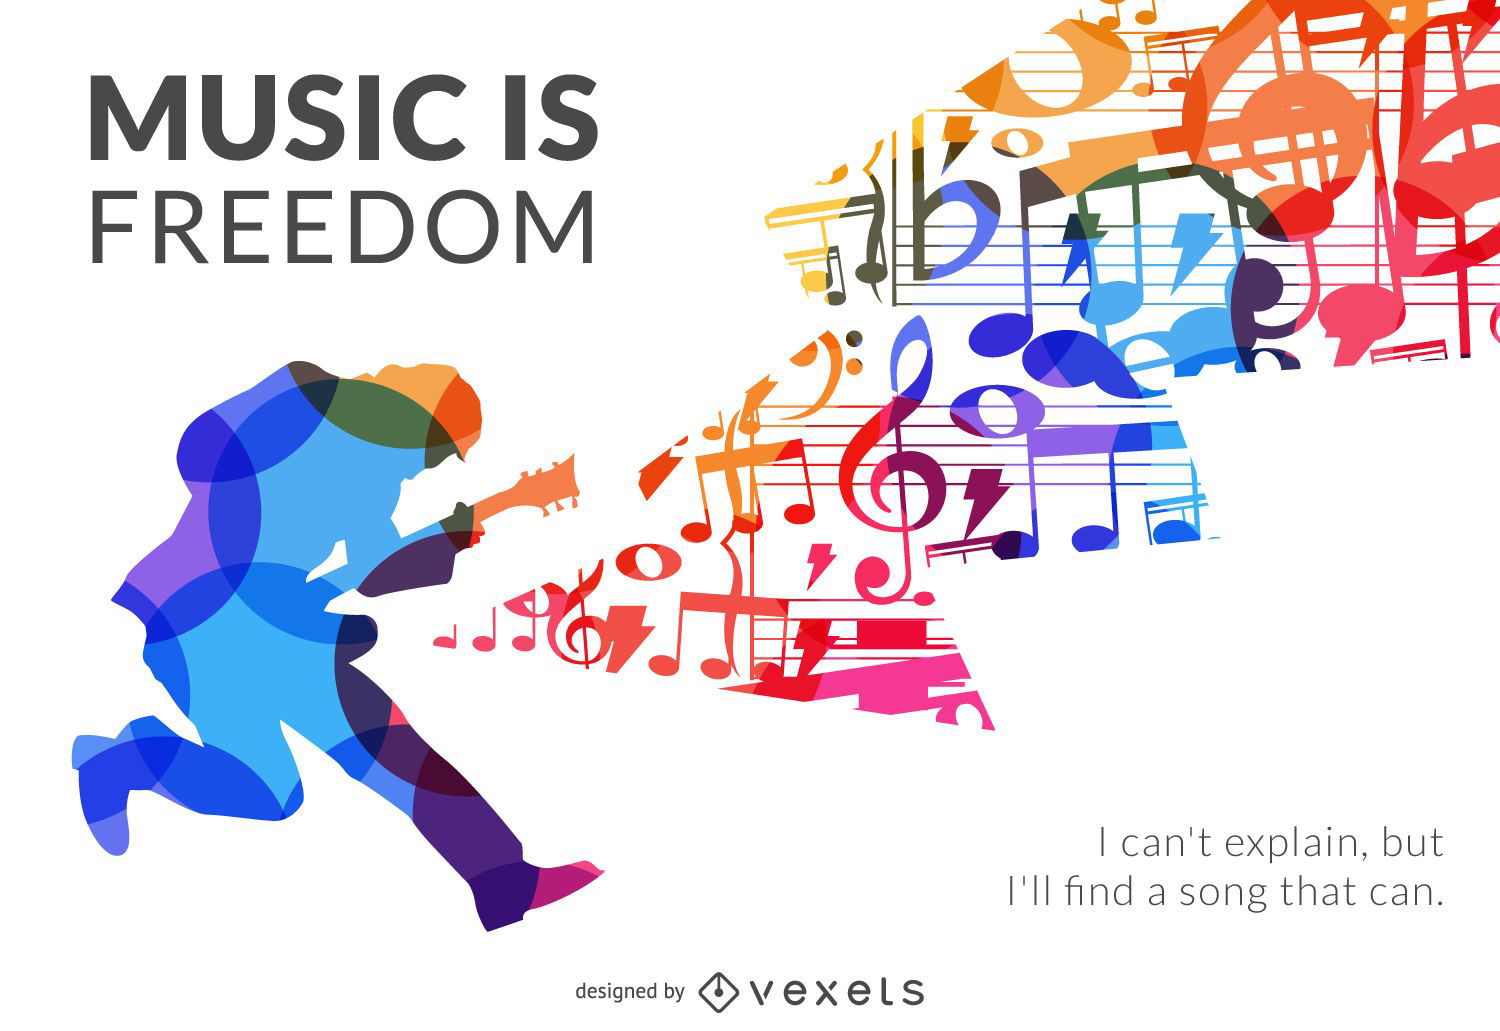 Music is freedom silhouette illustration